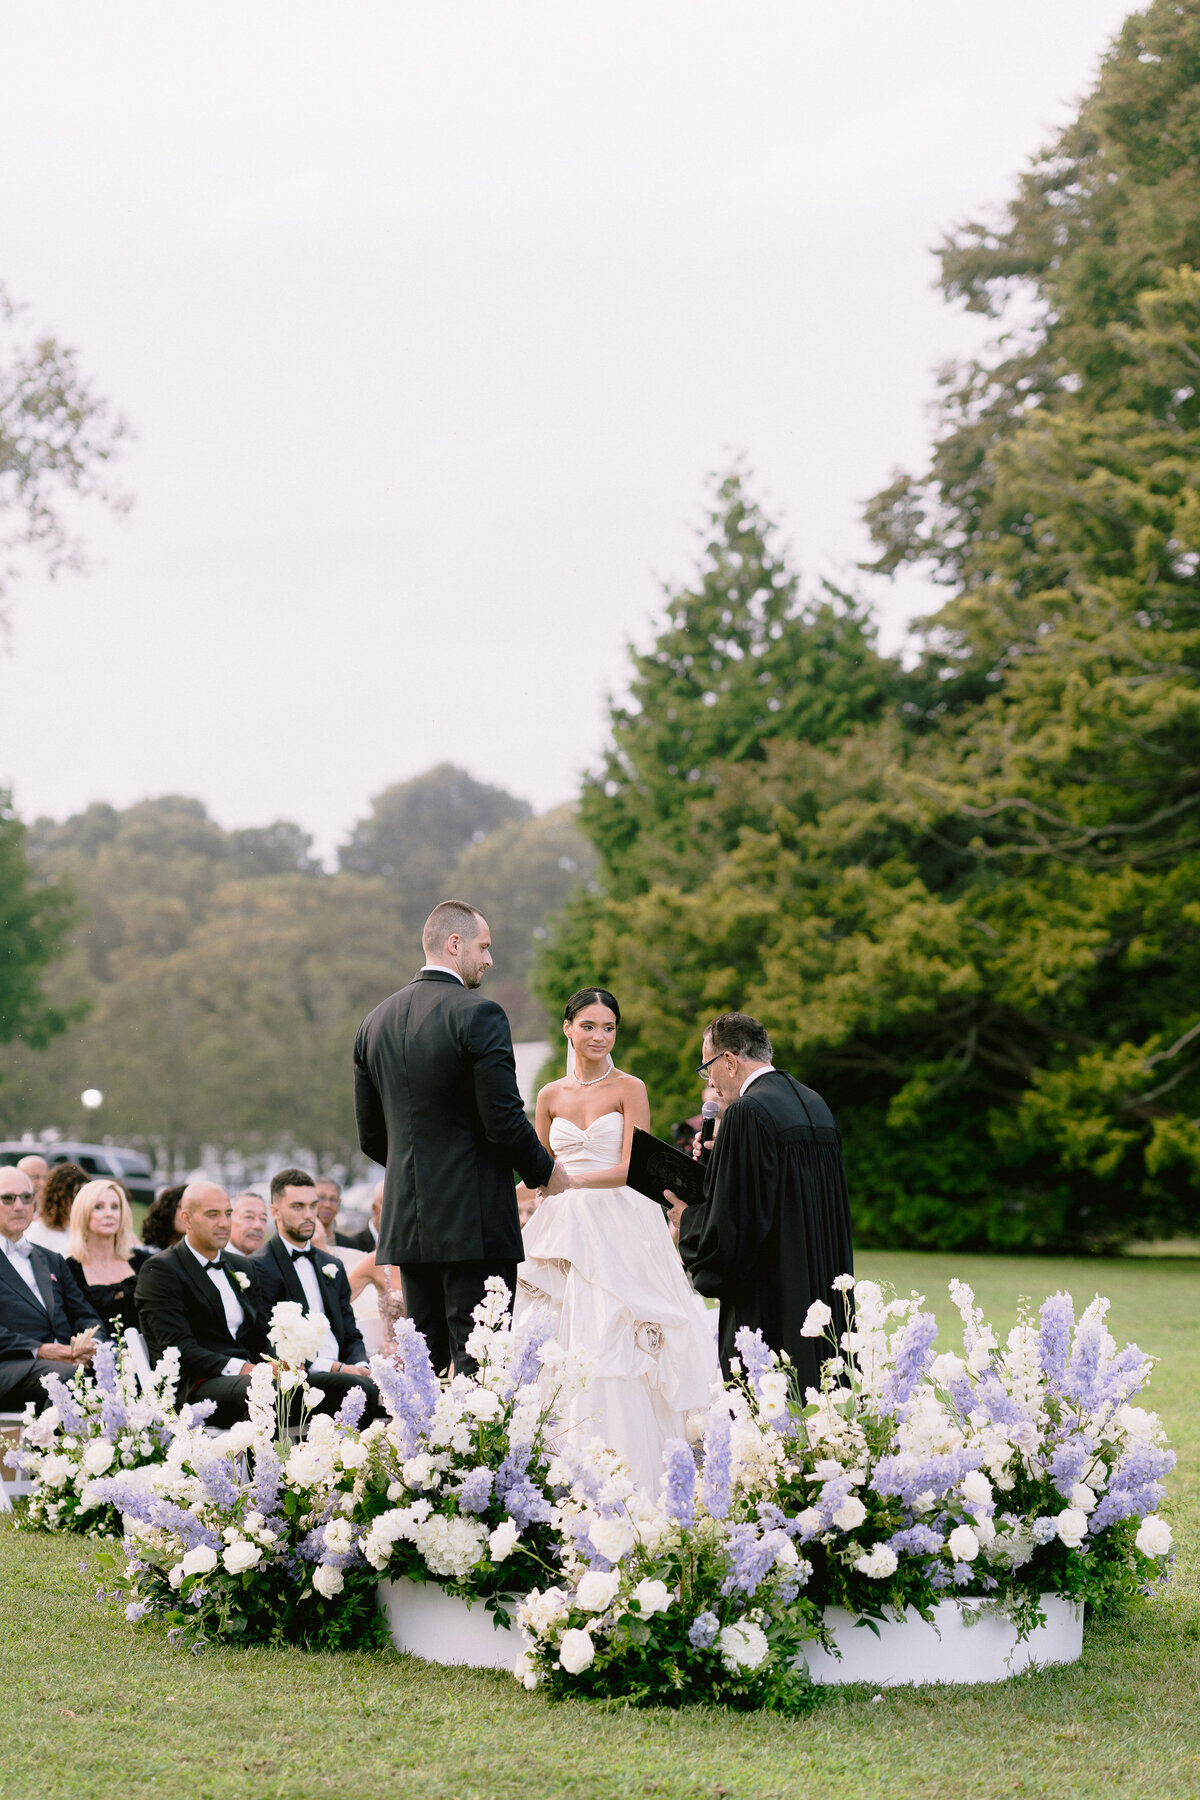 An outdoor wedding ceremony at Rosecliff mansion, with floral design by Stoneblossom